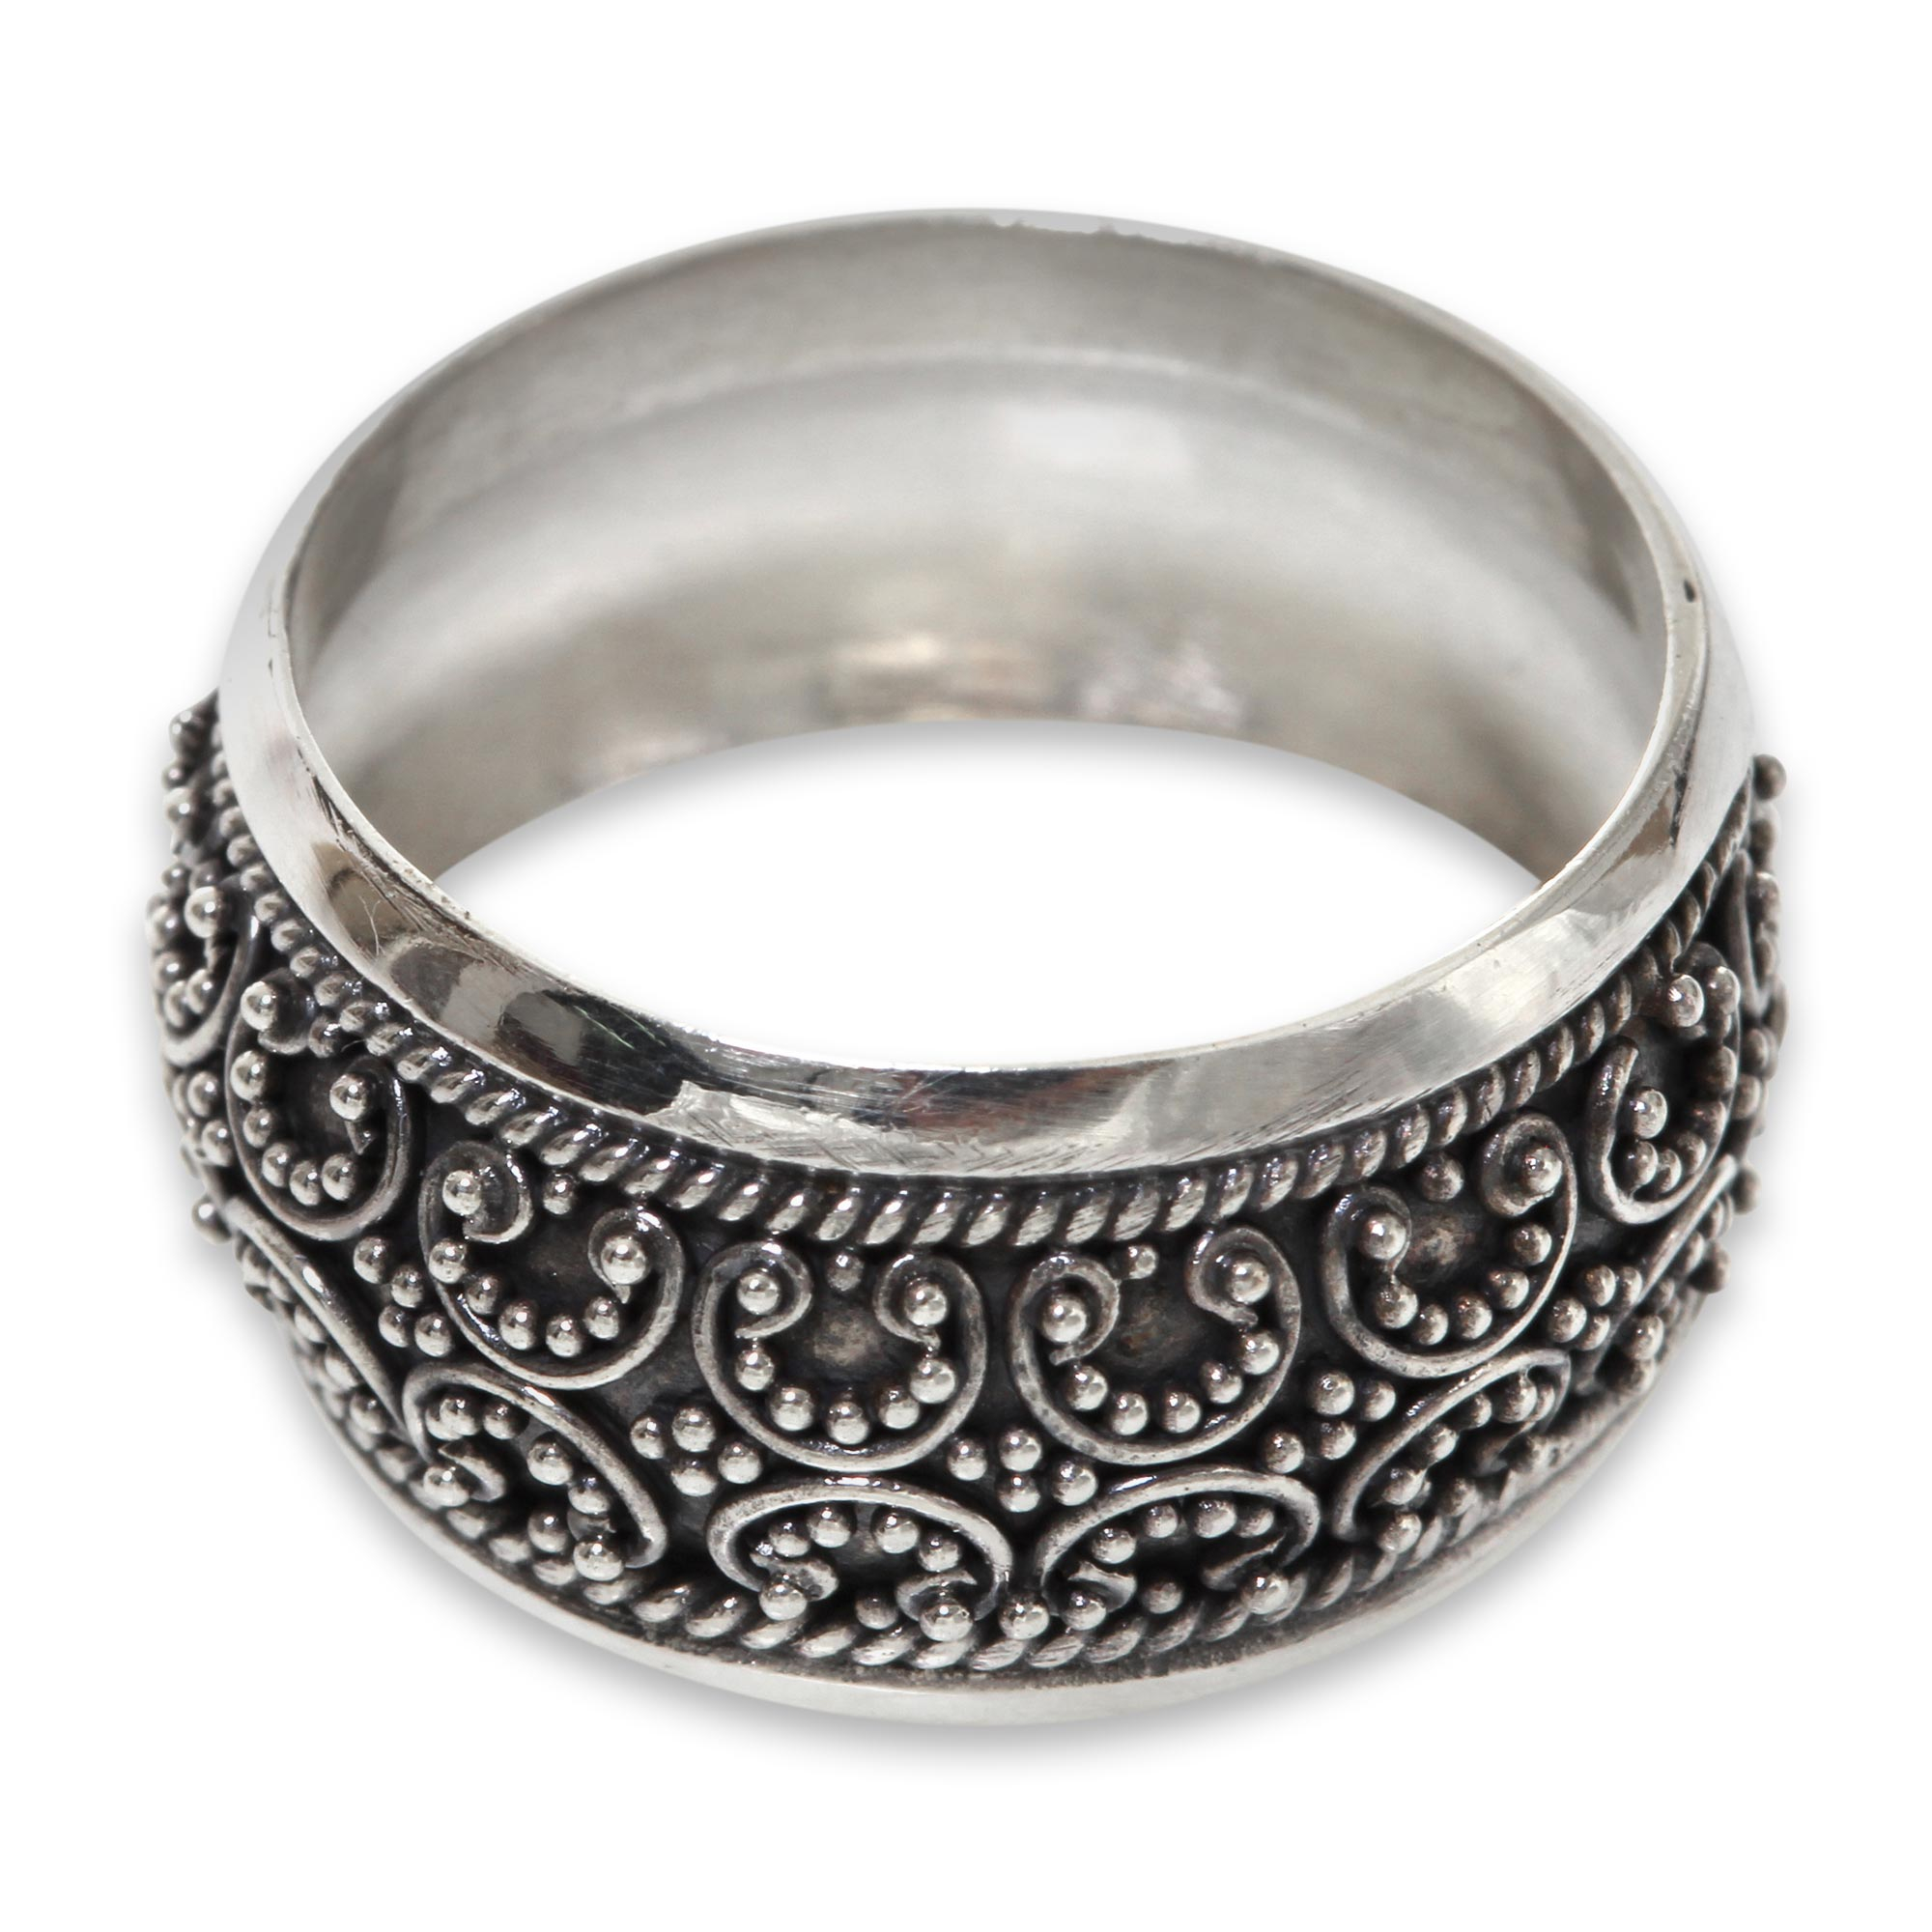 Balinese Style Band Ring Handmade Sterling Silver Jewelry - Celuk ...